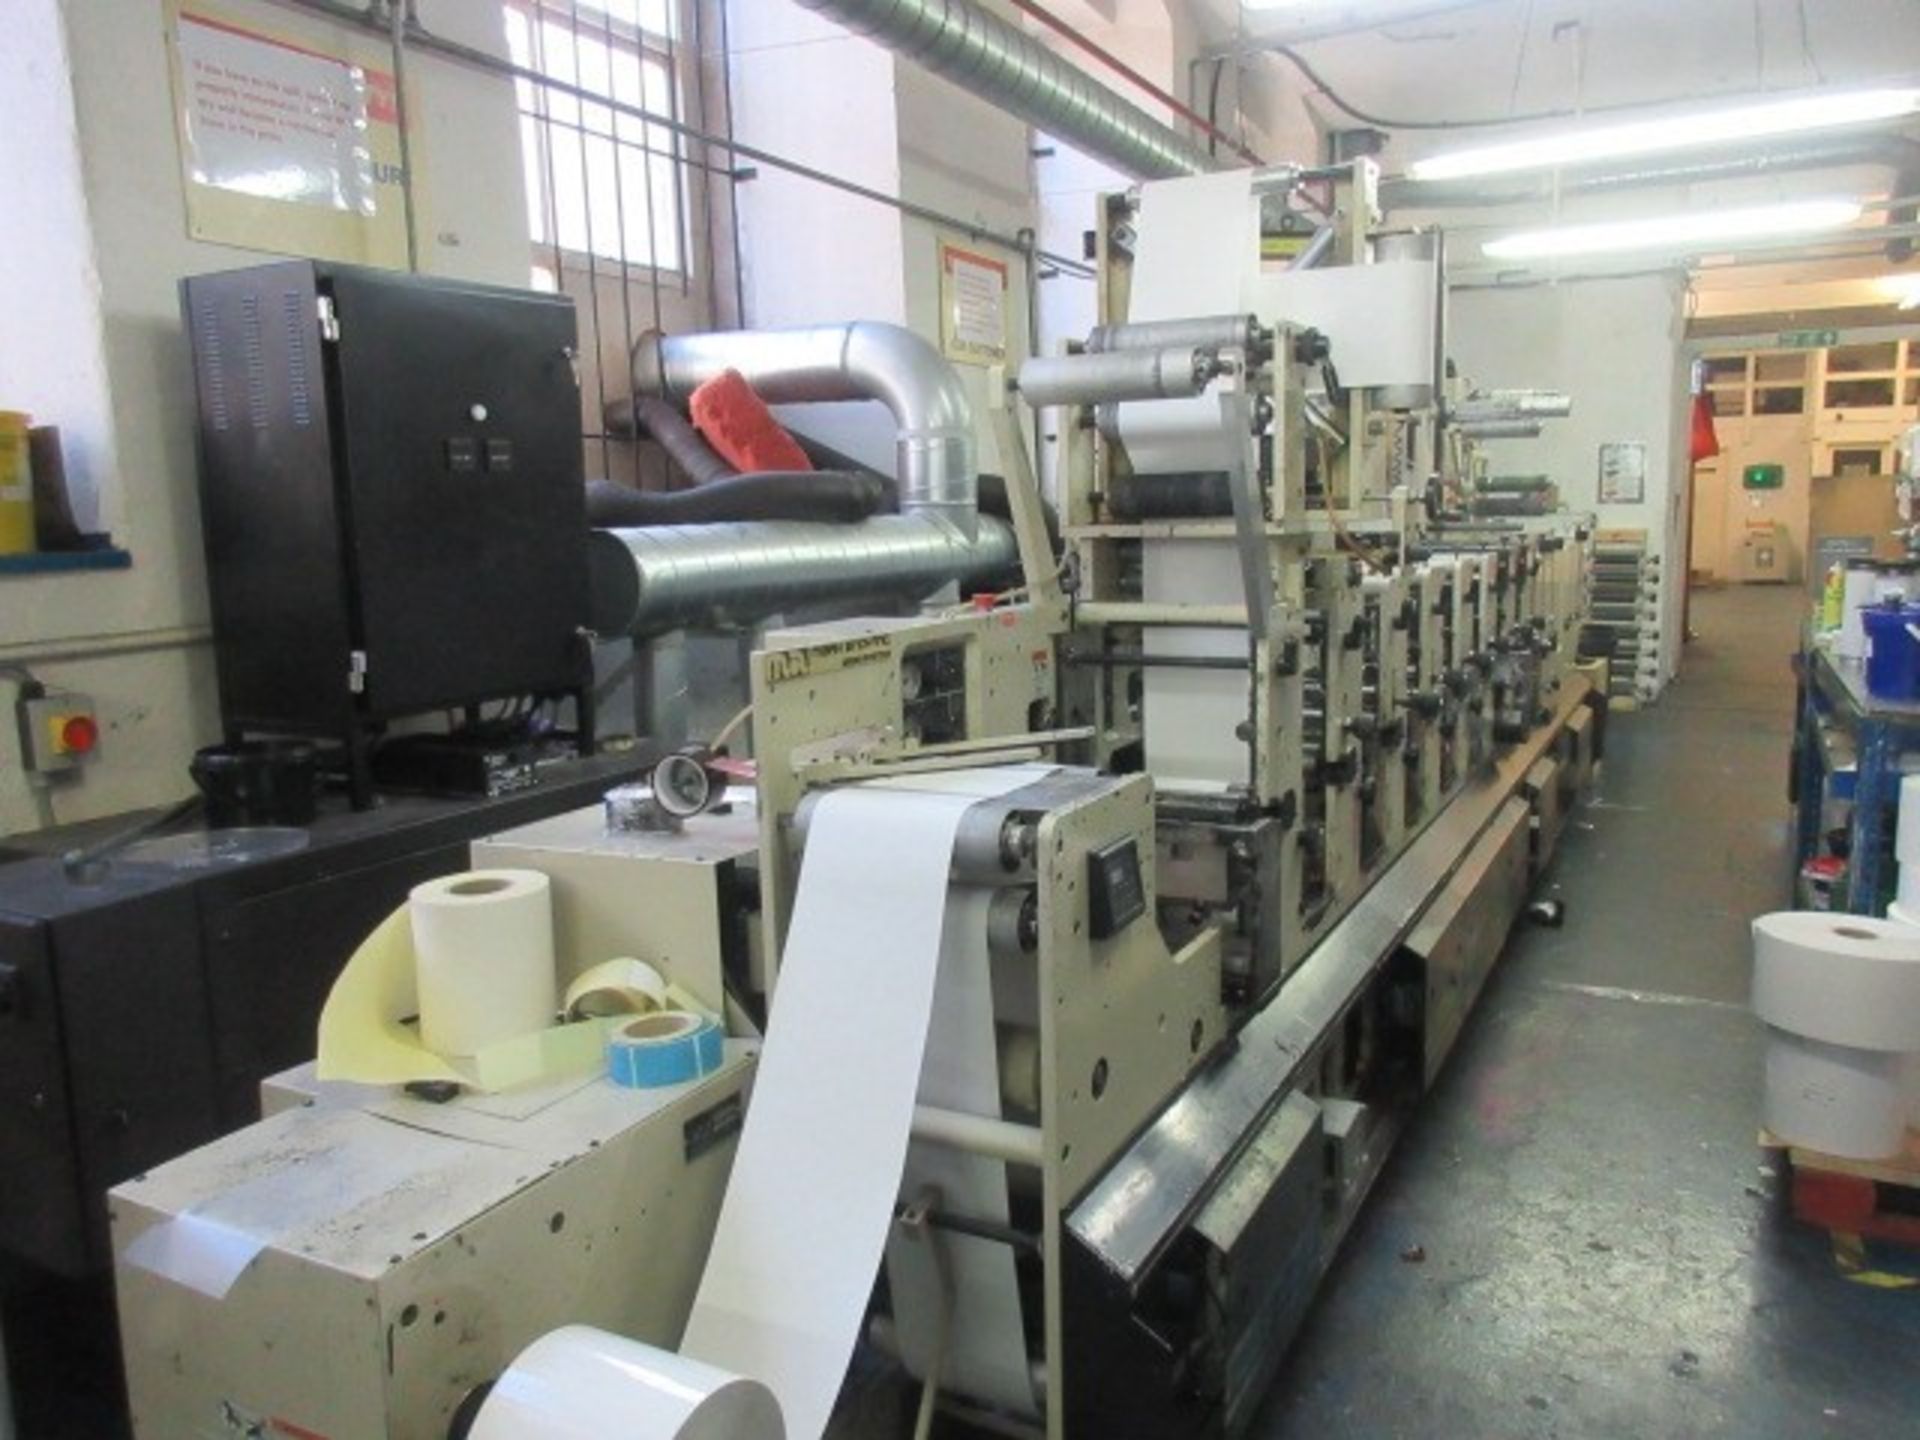 Mark Andy 2200-10F 10” 8 colour flexographic label printing press. Serial no: 1260086 (2002) - Image 88 of 383